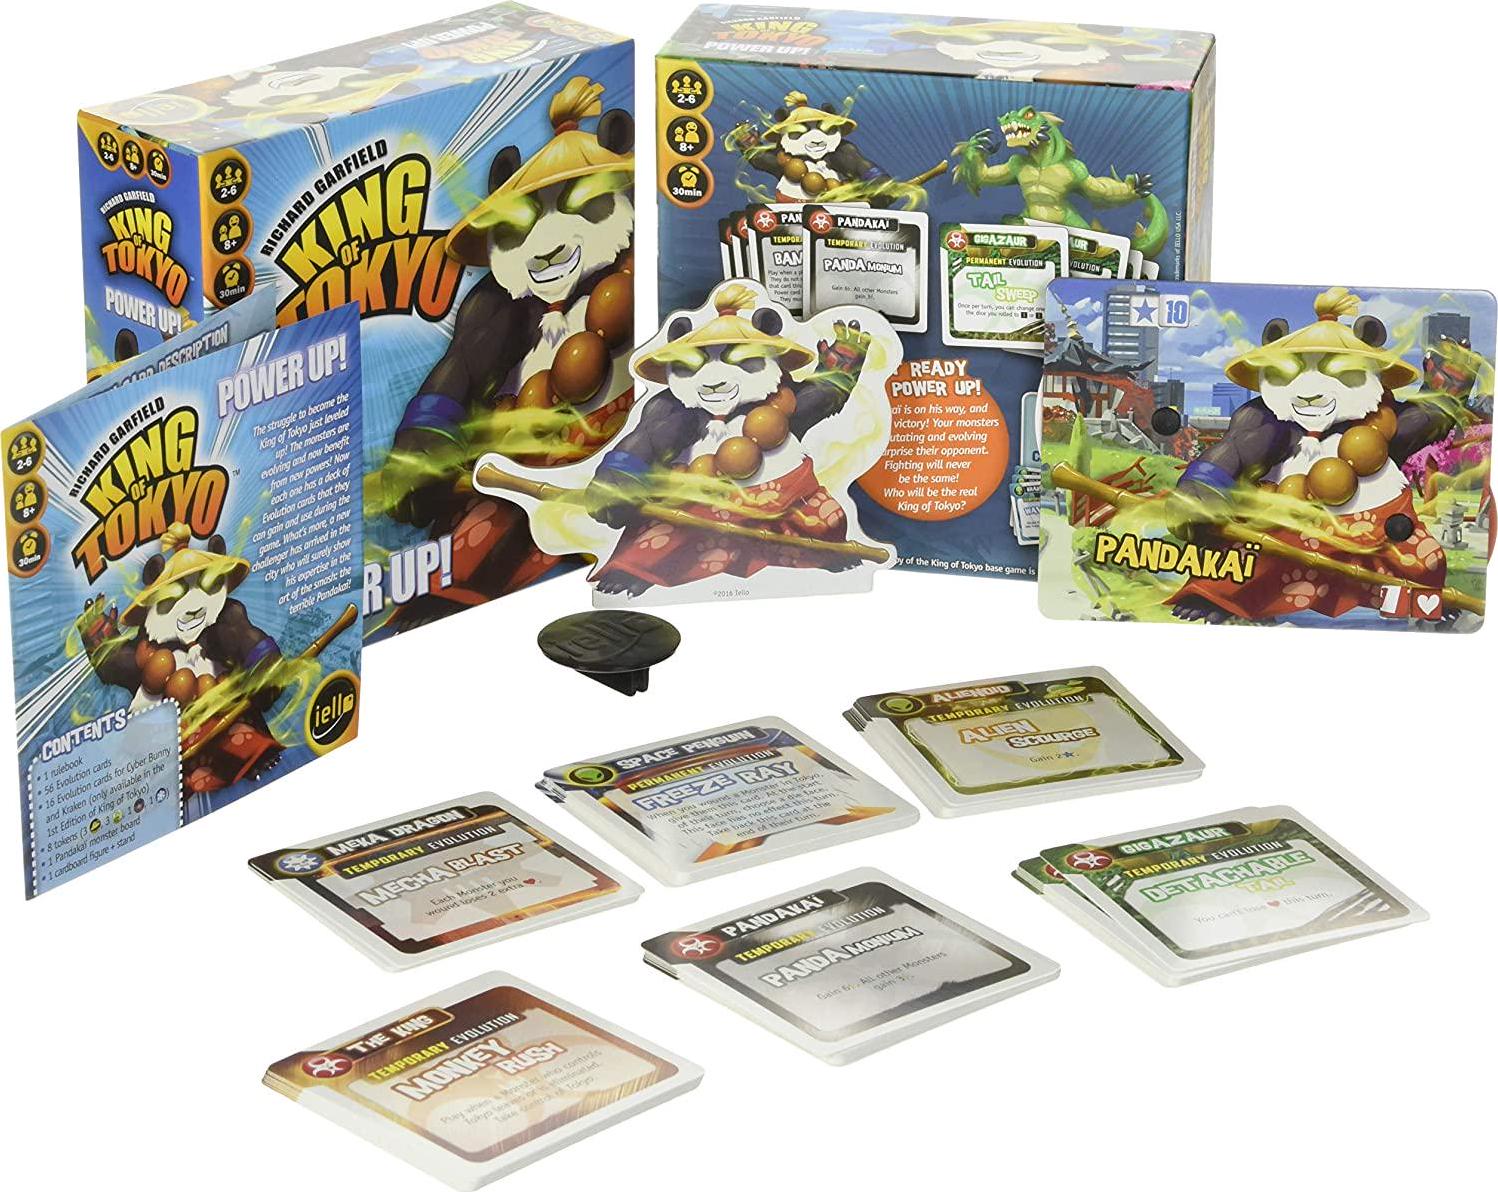 IELLO, King of Tokyo Power Up (2017 Version) Expansion